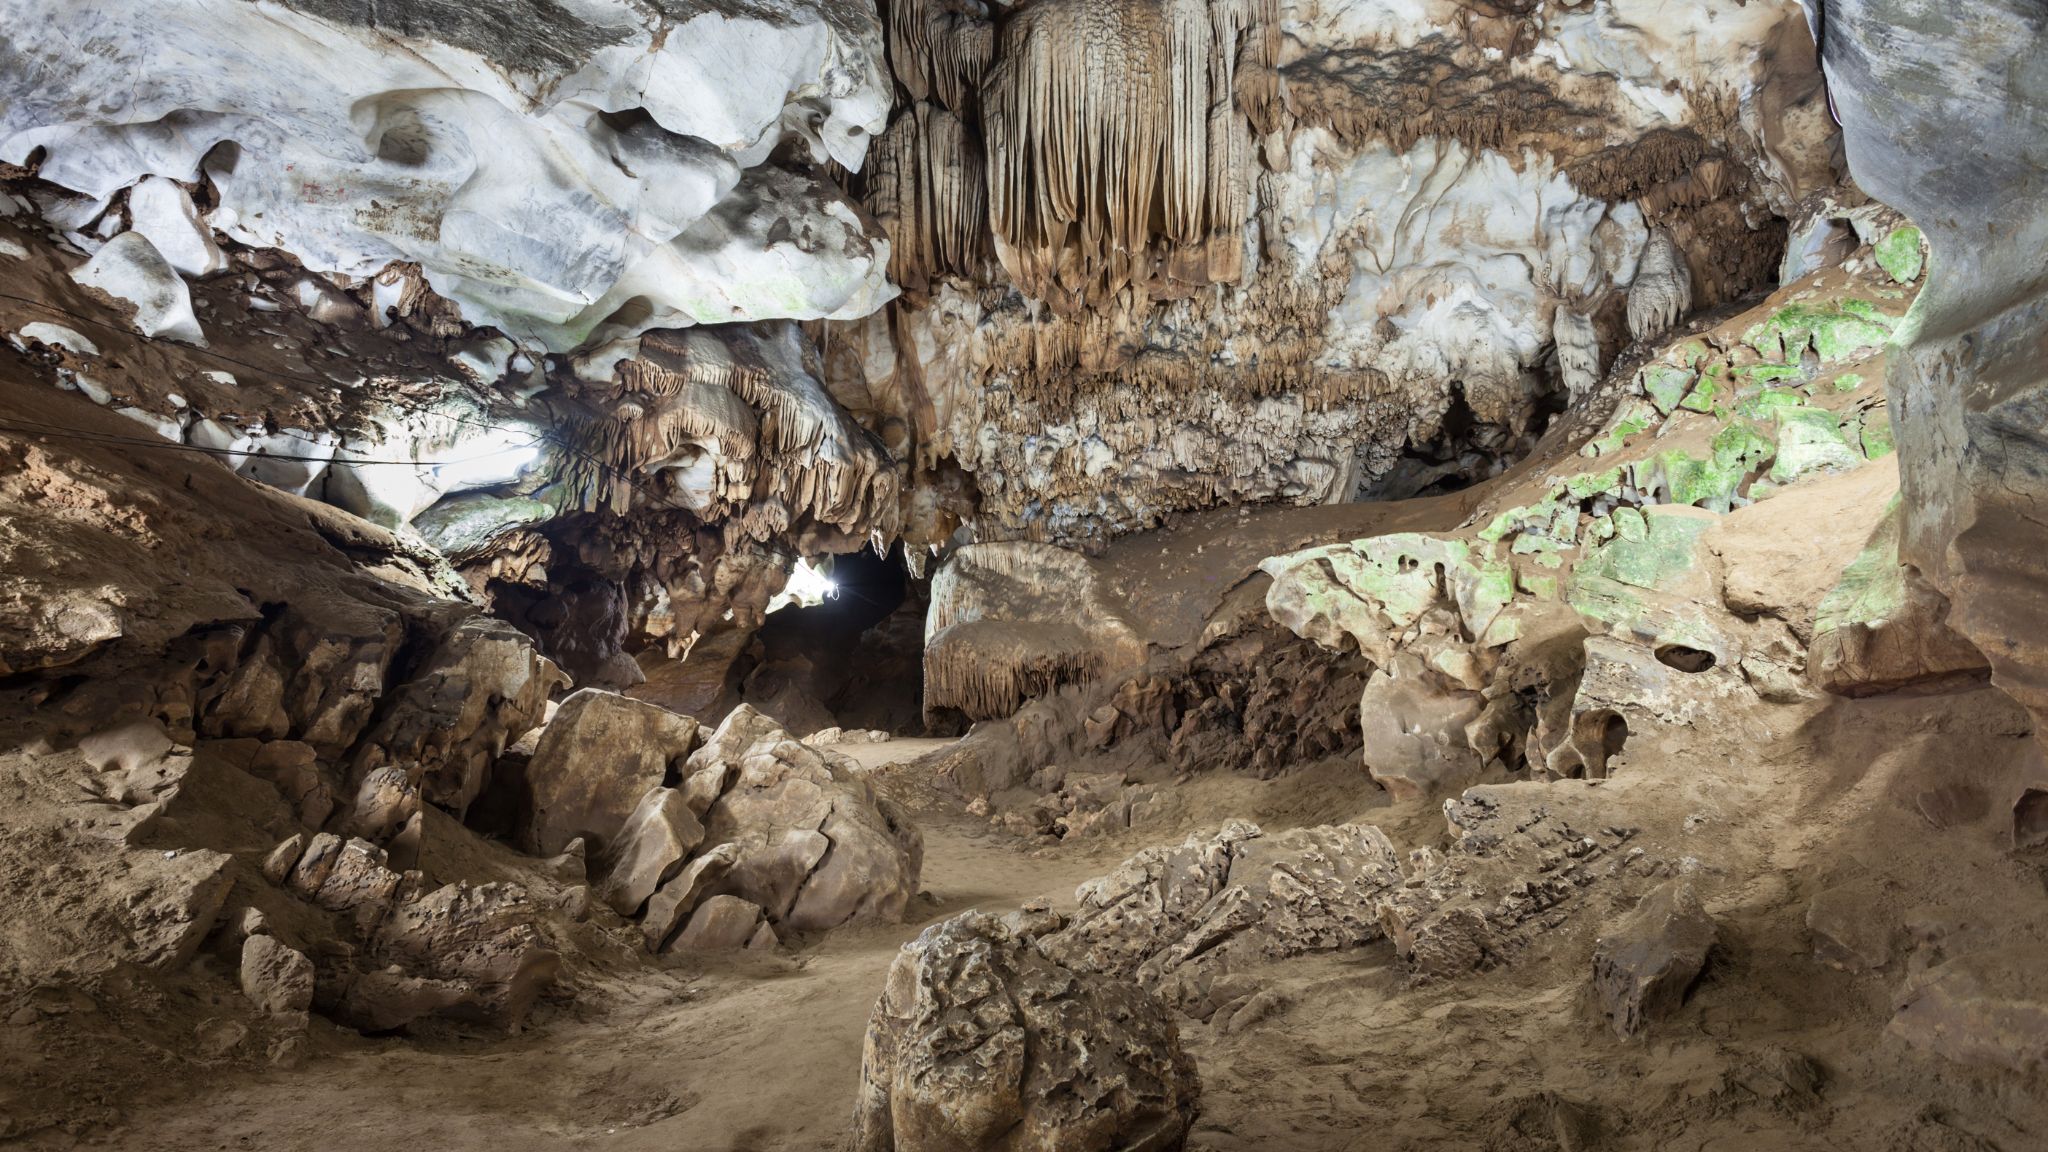 Day 5 Explore The Amazing Beauty Inside The Chiang Dao Cave